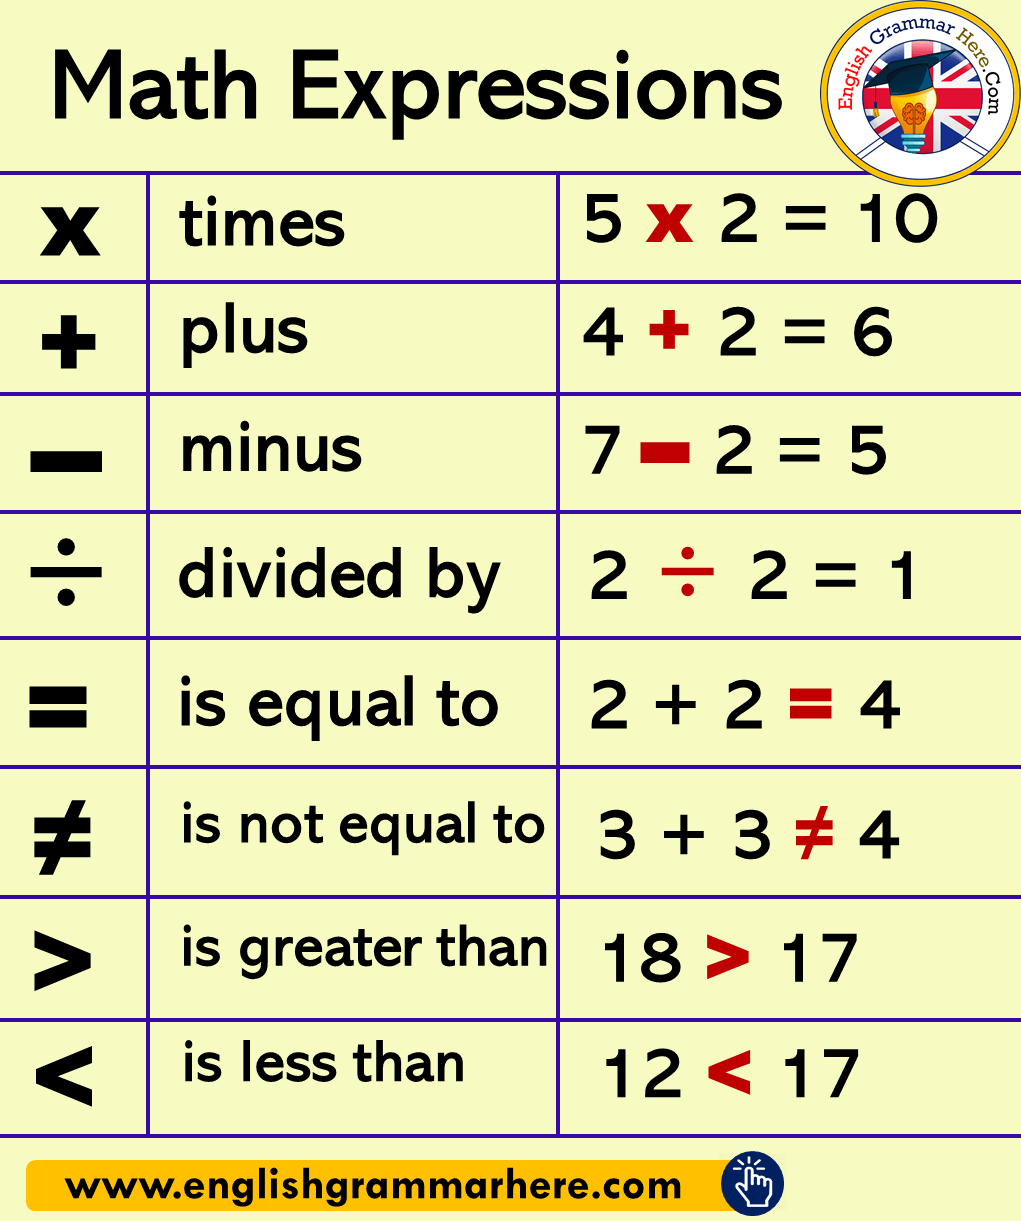 English Math Expressions Phrases